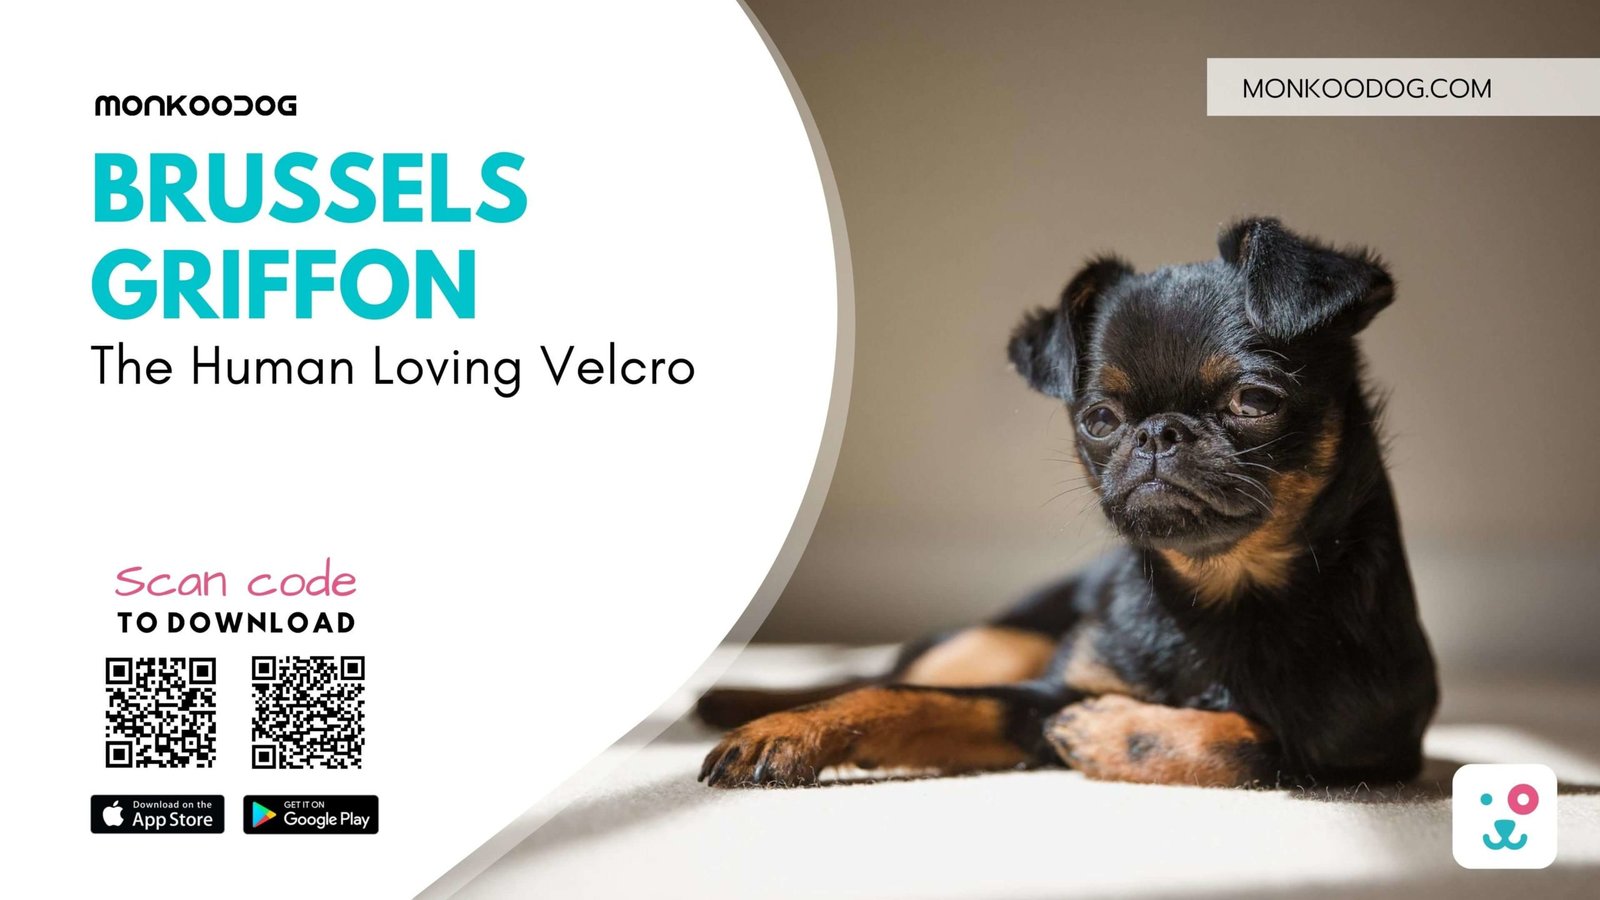 how much does a brussels griffon dog cost